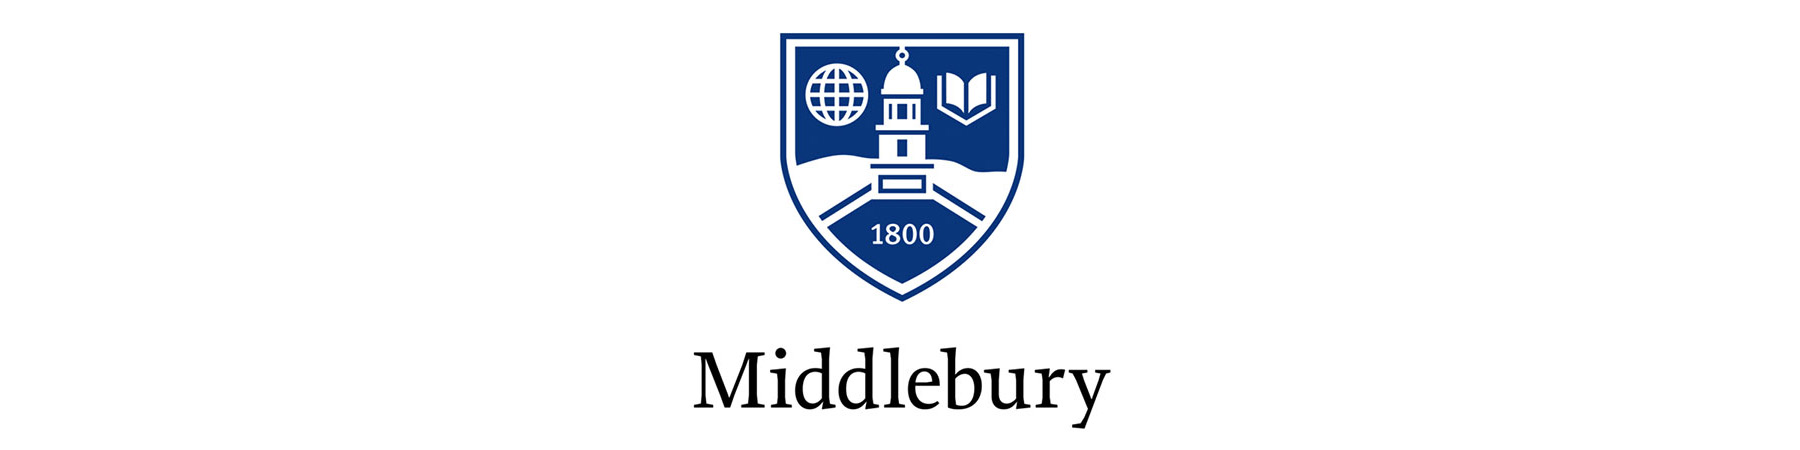 Middlebury College – CMRS Oxford Humanities Program